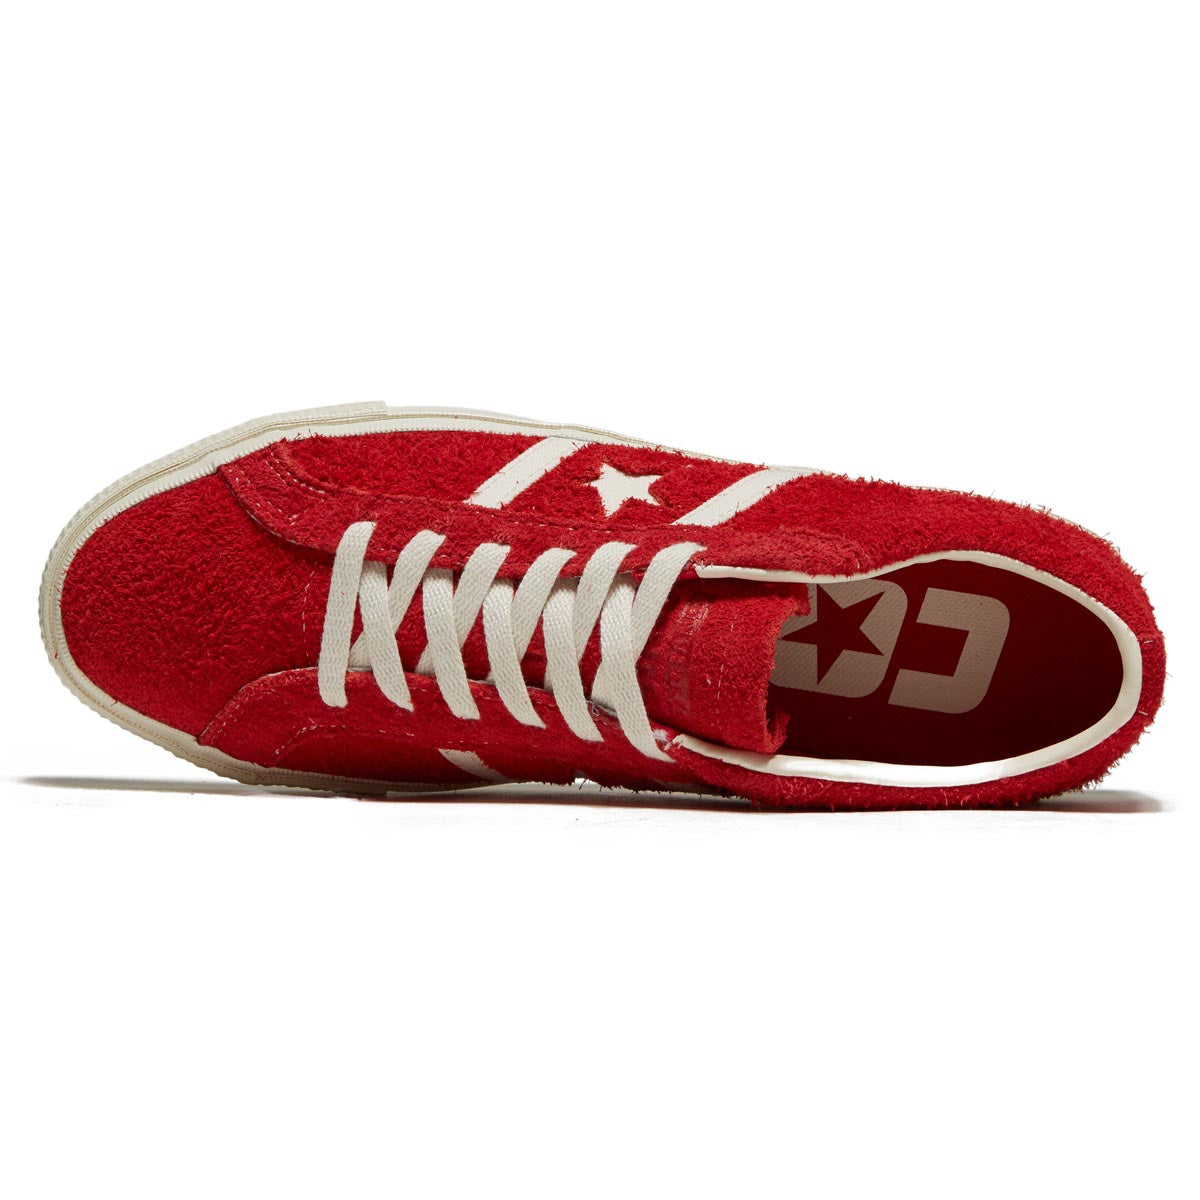 Converse One Star Academy Pro Shoes - Red/Egret/Egret image 3